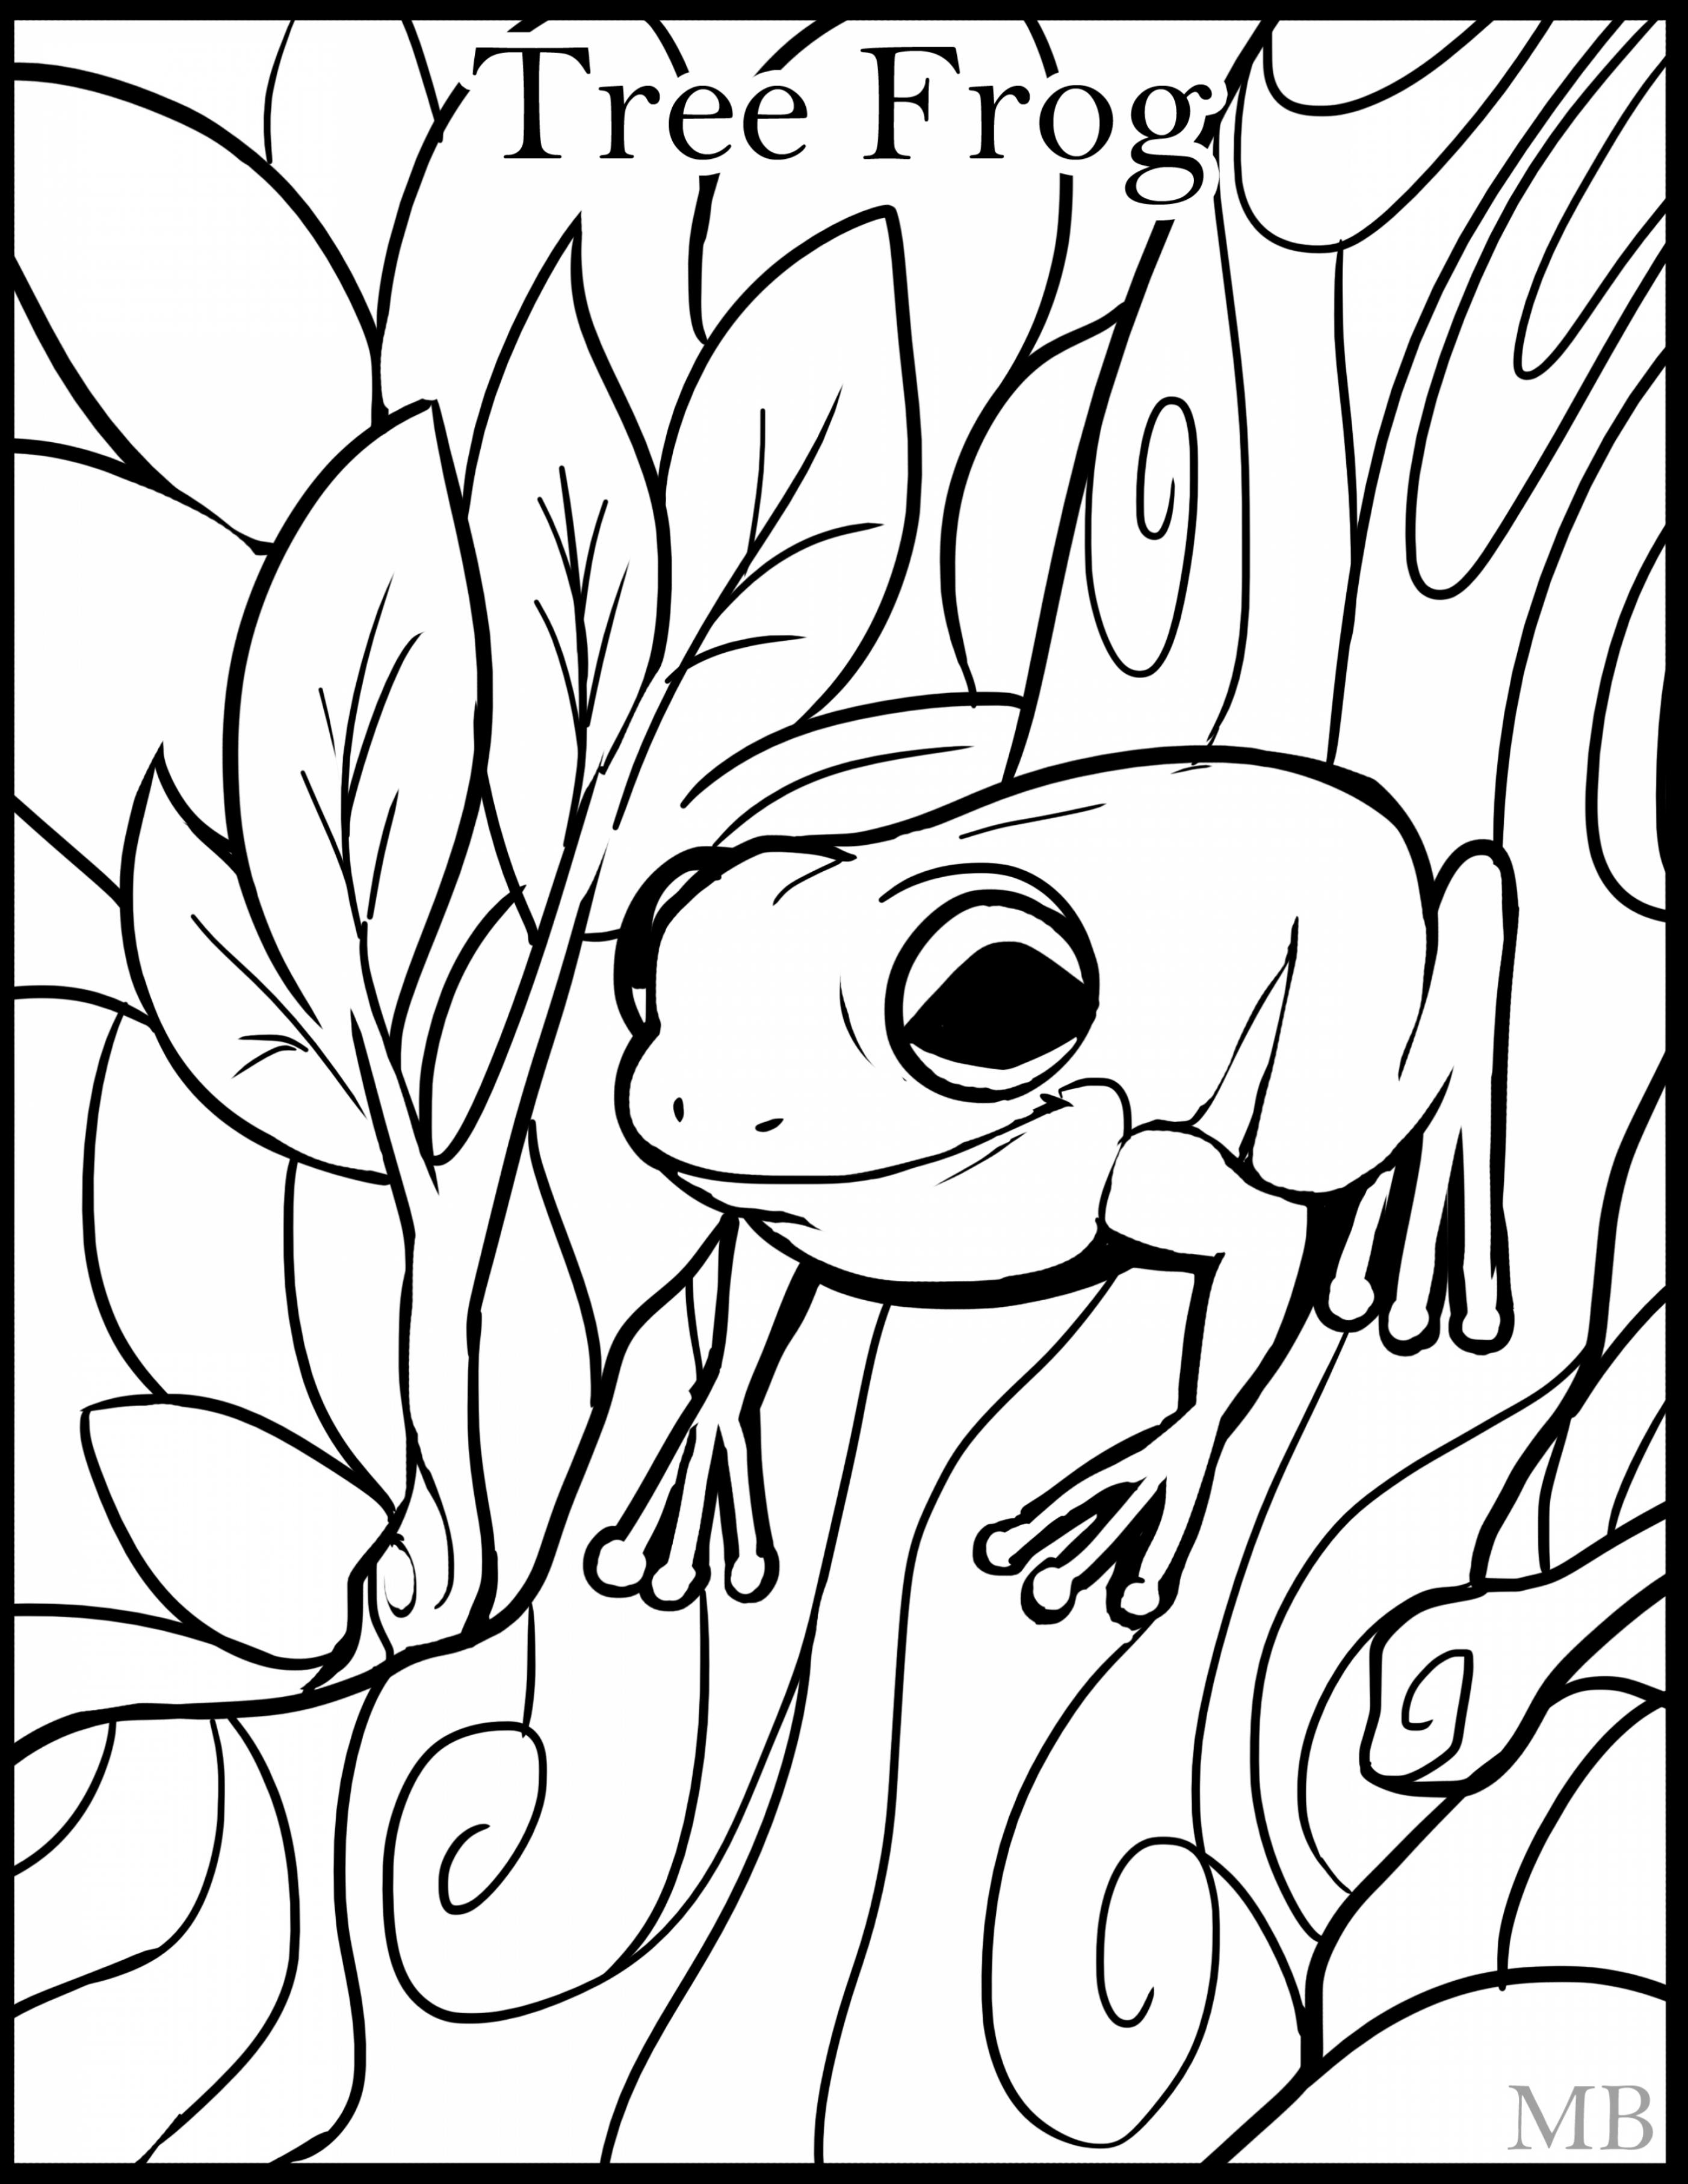 Magnificent Tree Frog coloring #15, Download drawings